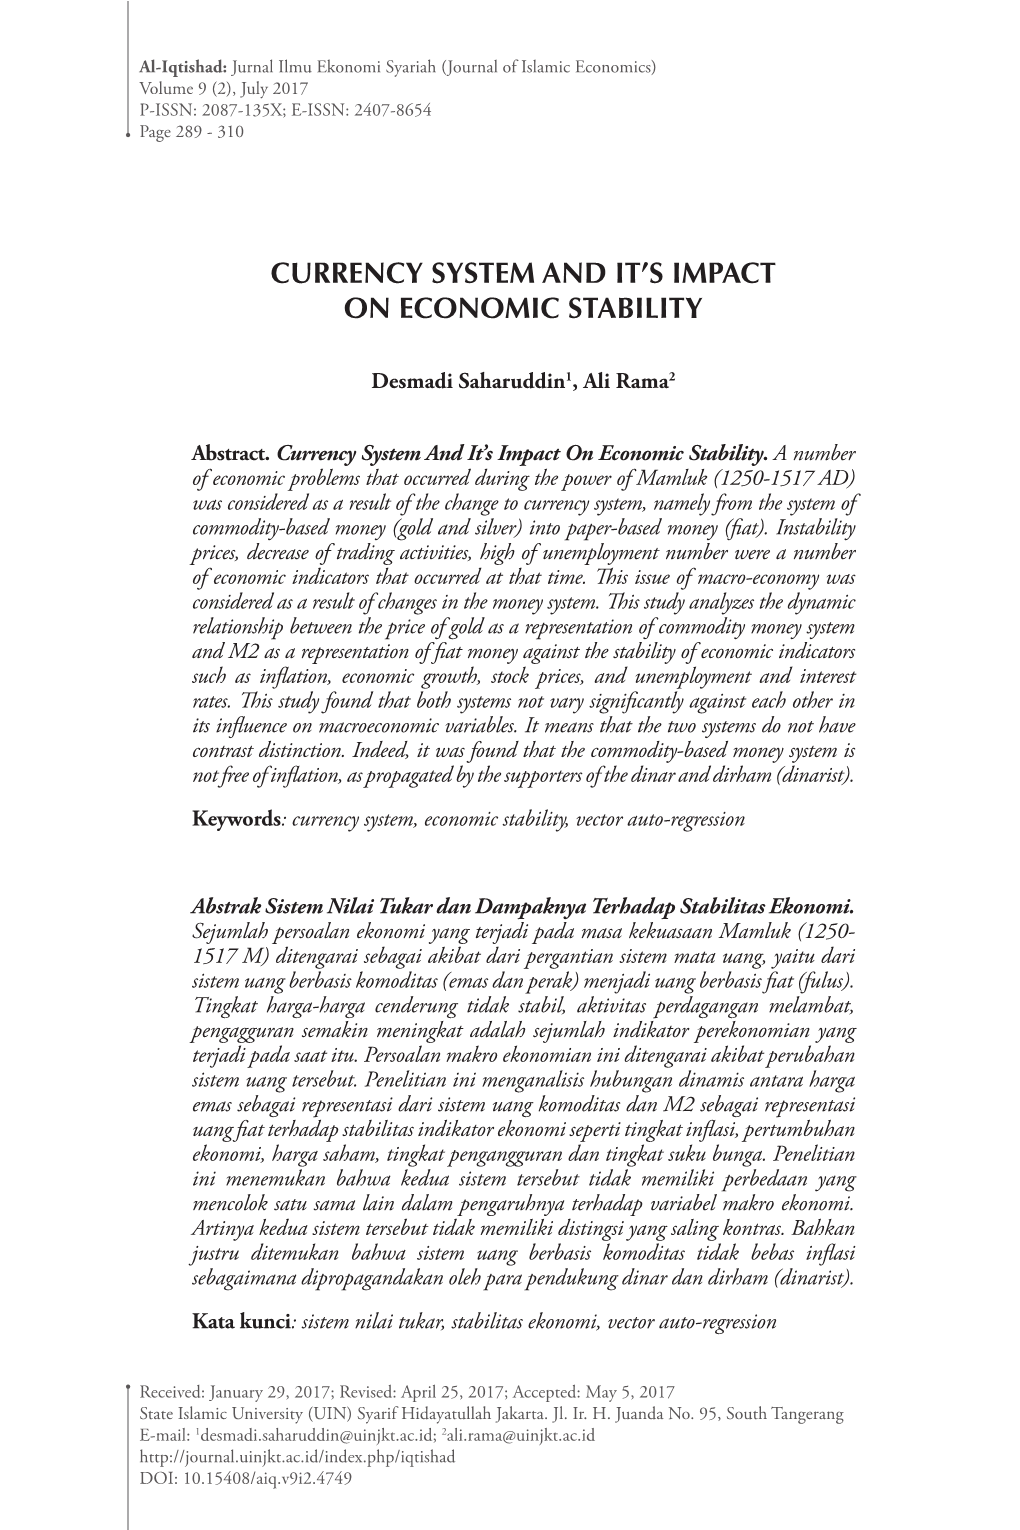 Currency System and It's Impact on Economic Stability